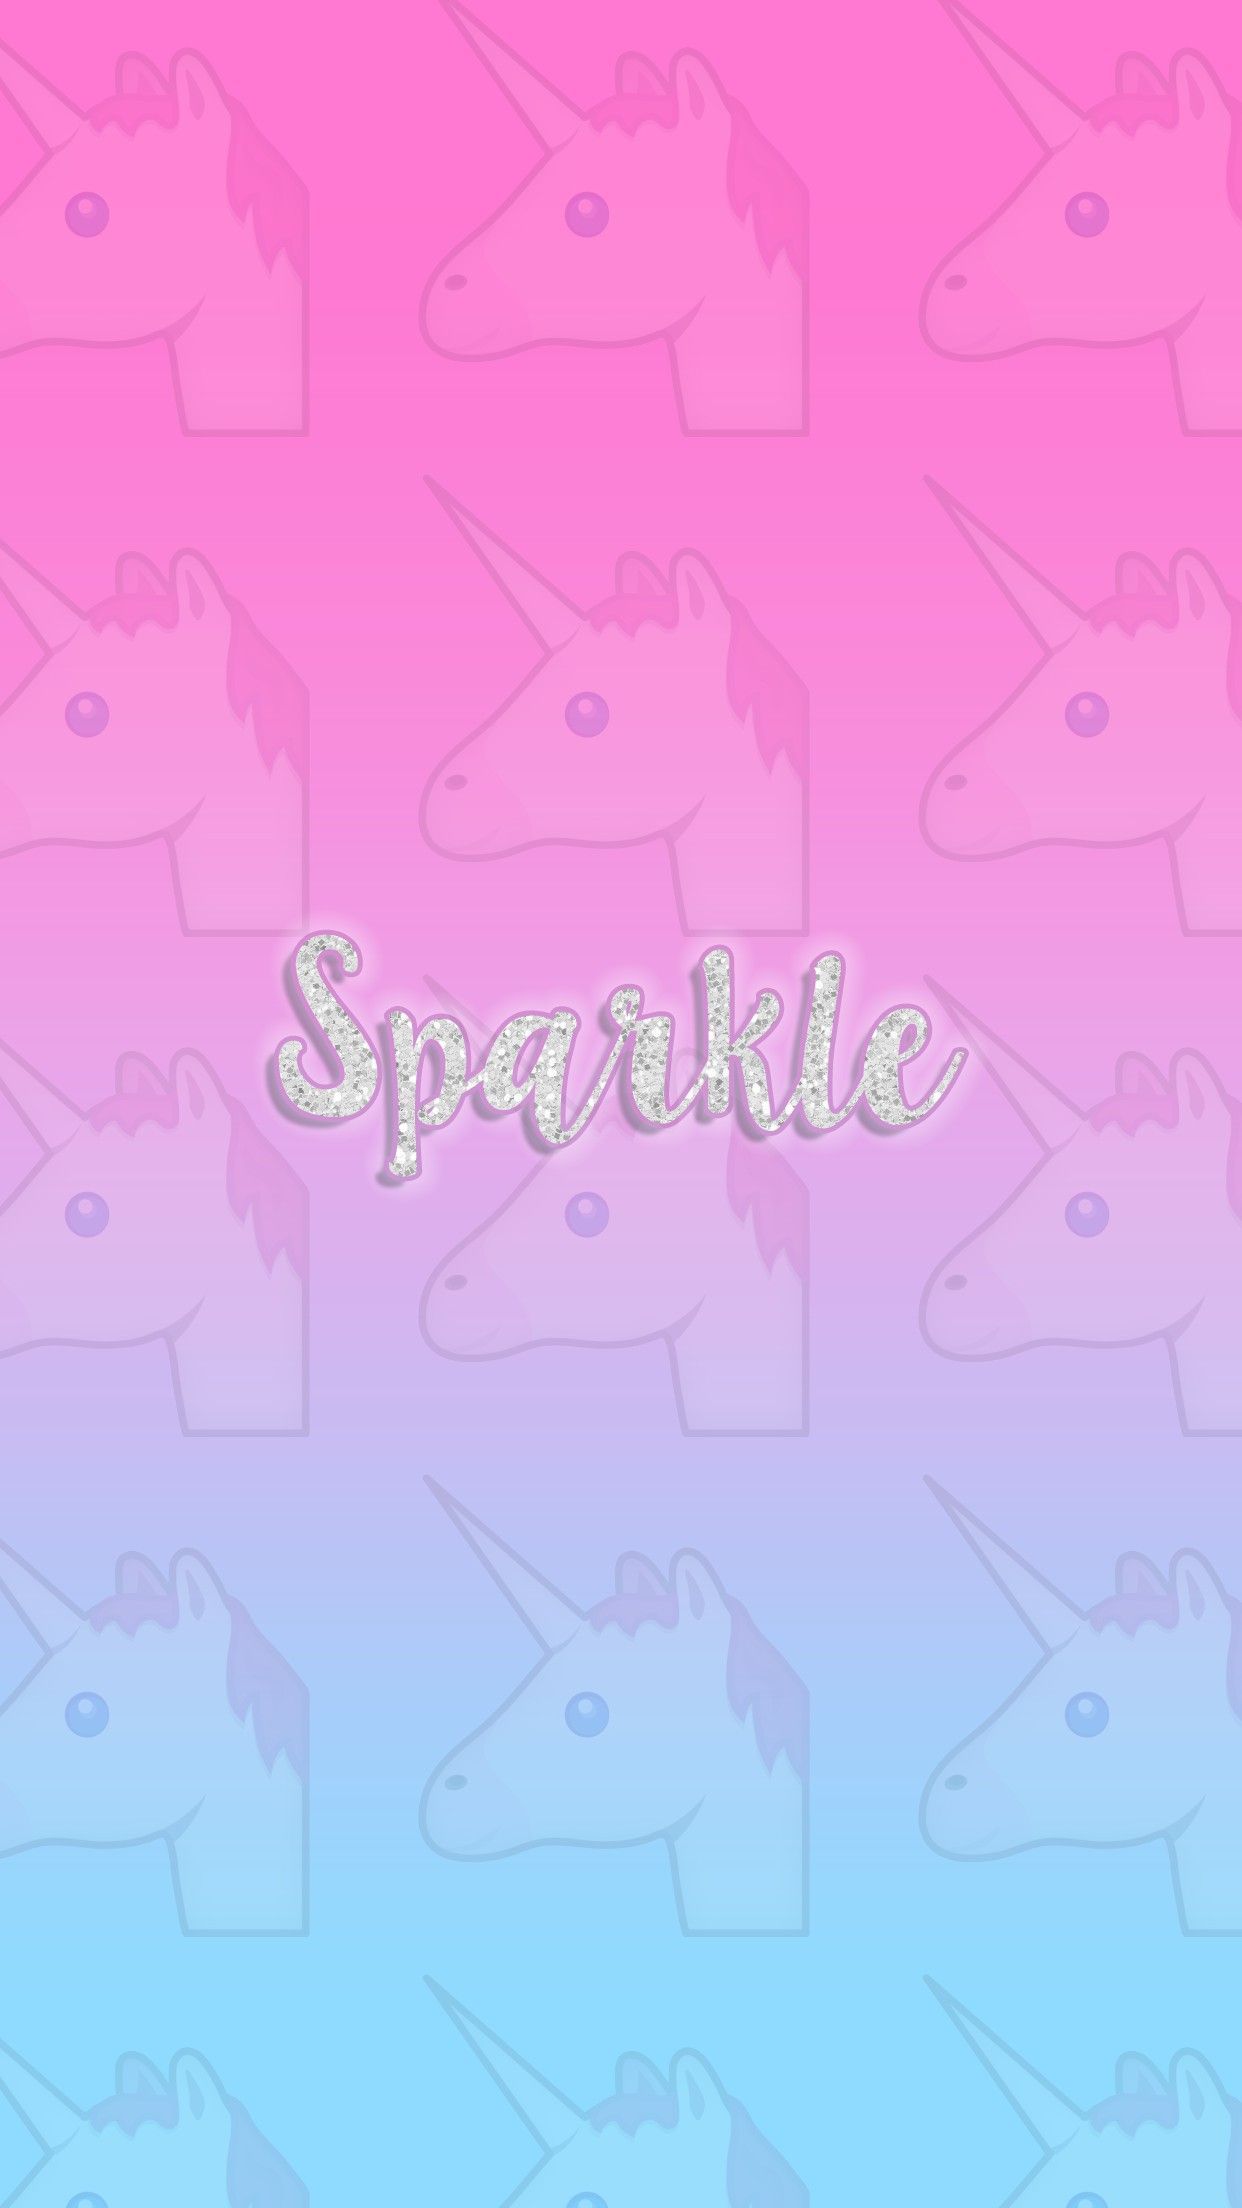 A pink and blue gradient background with the word 